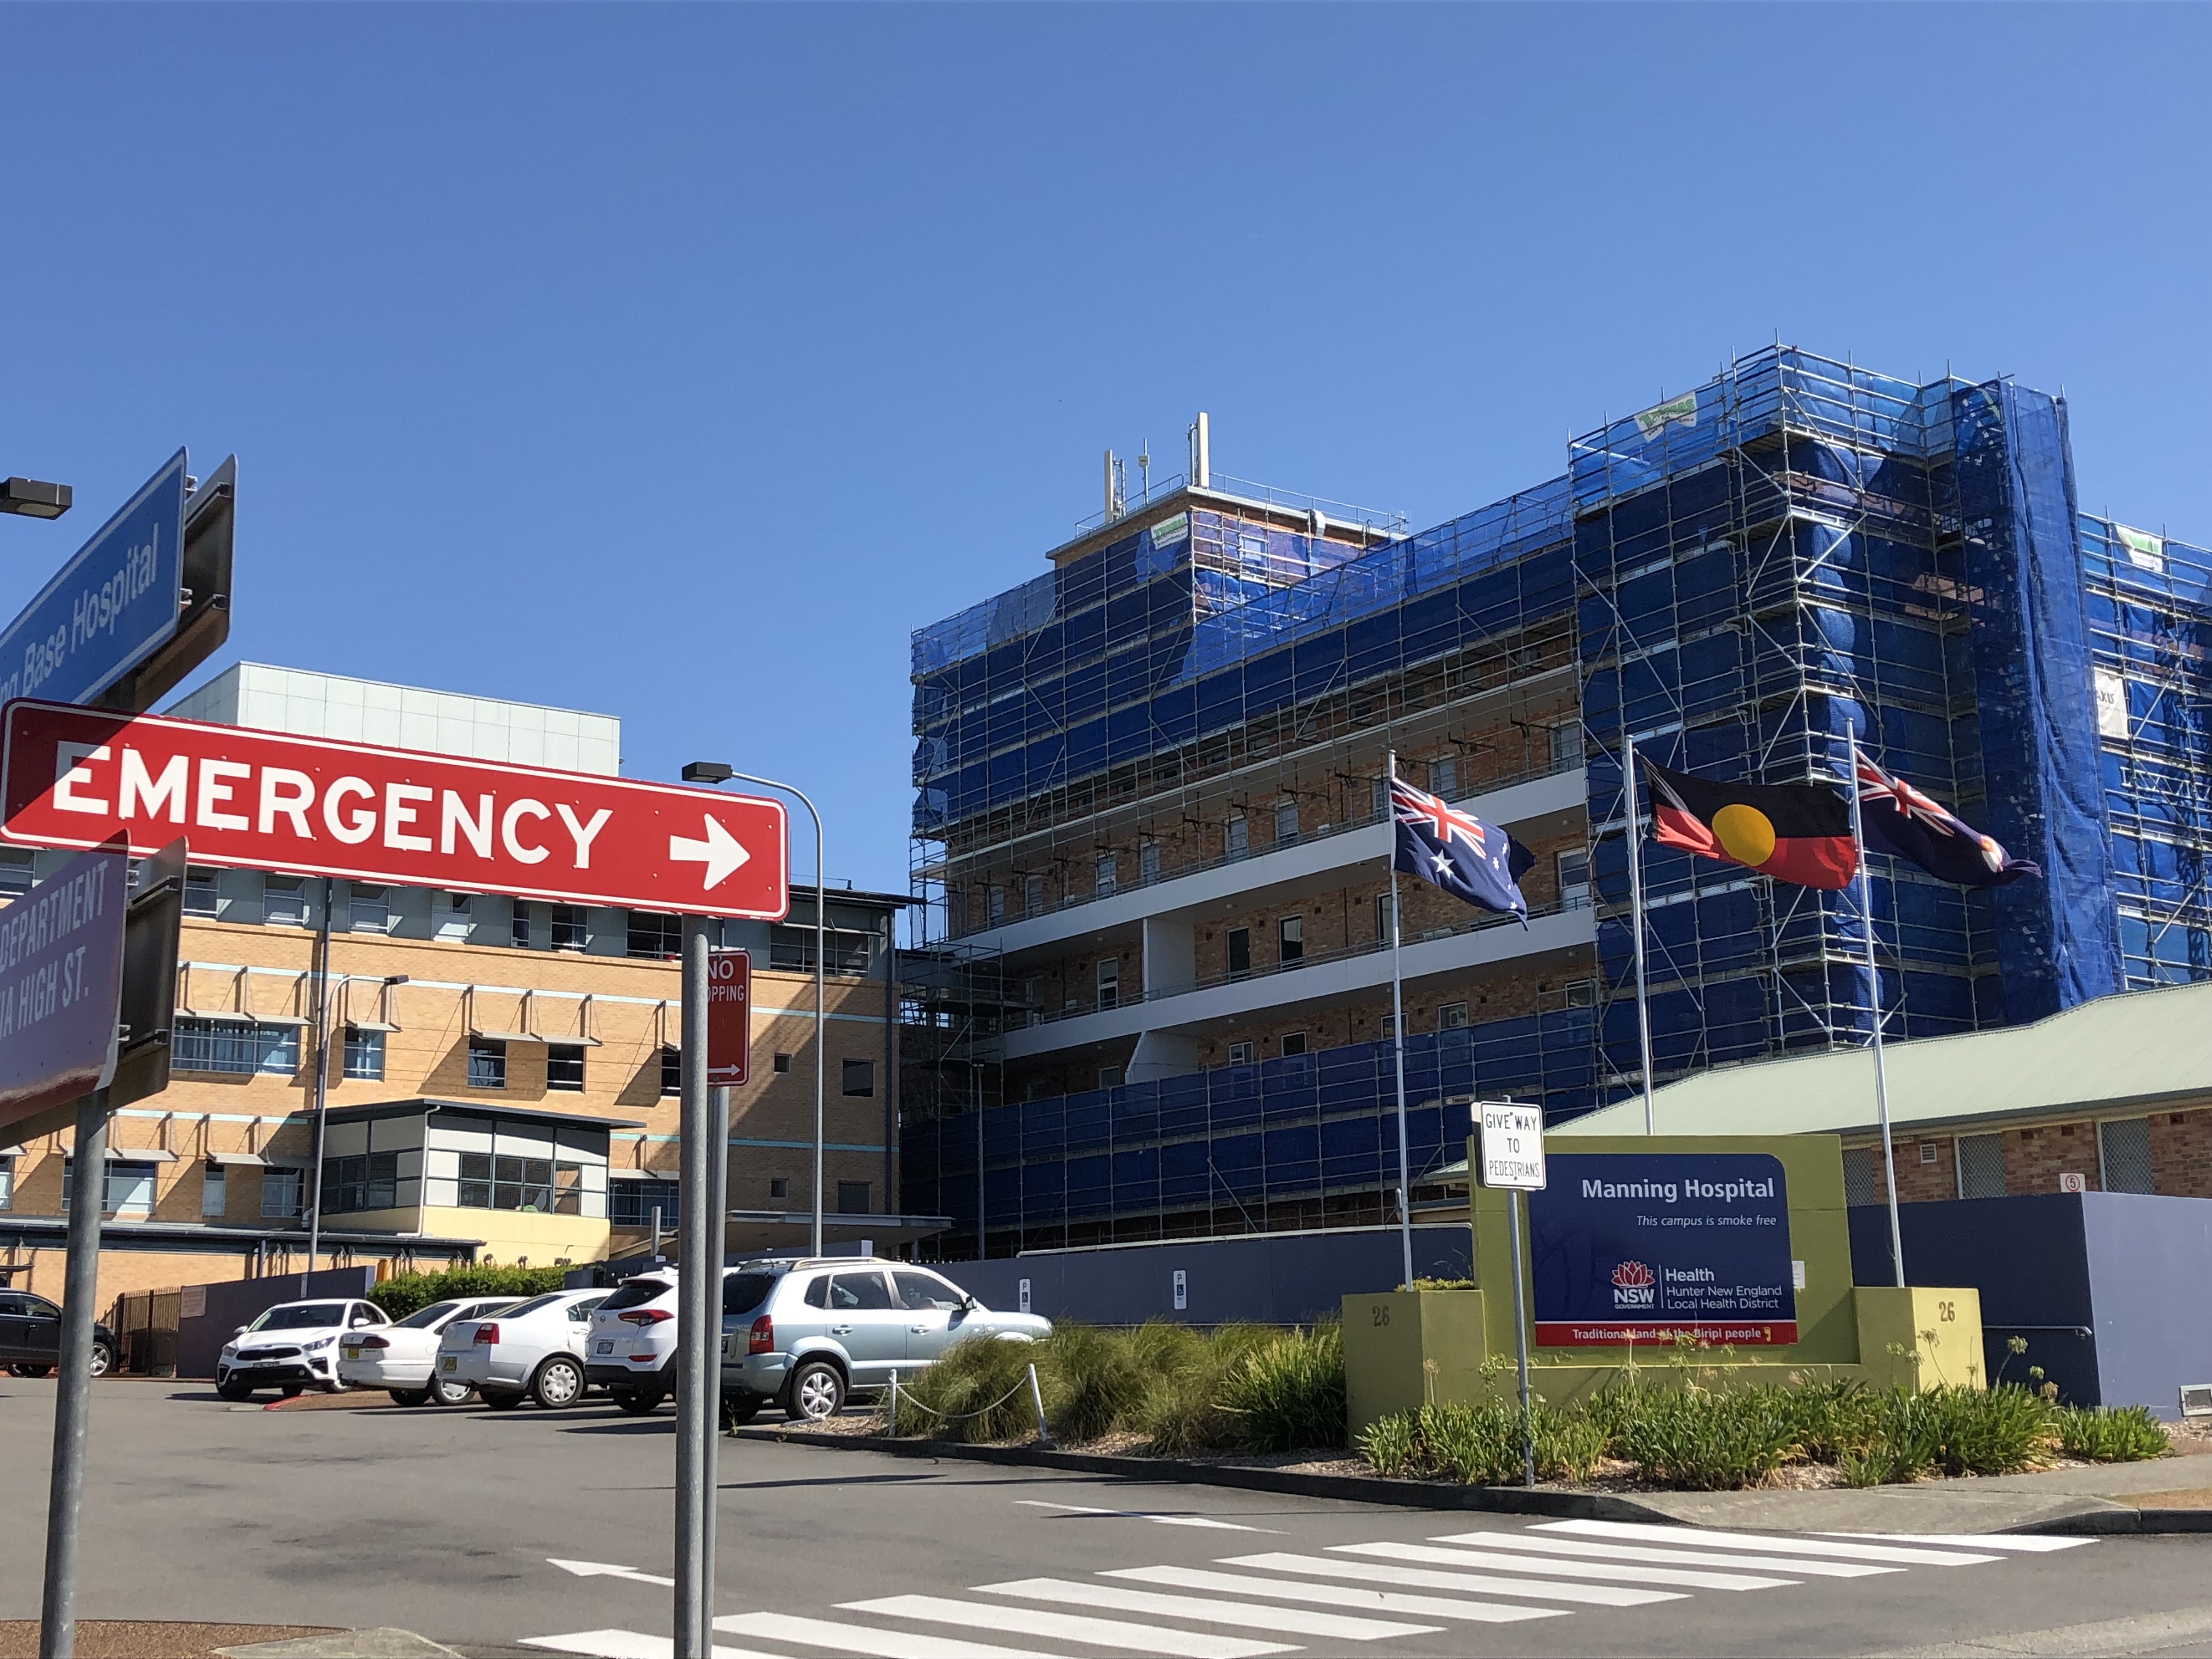  So What Is Manning Hospital REALLY going to get?